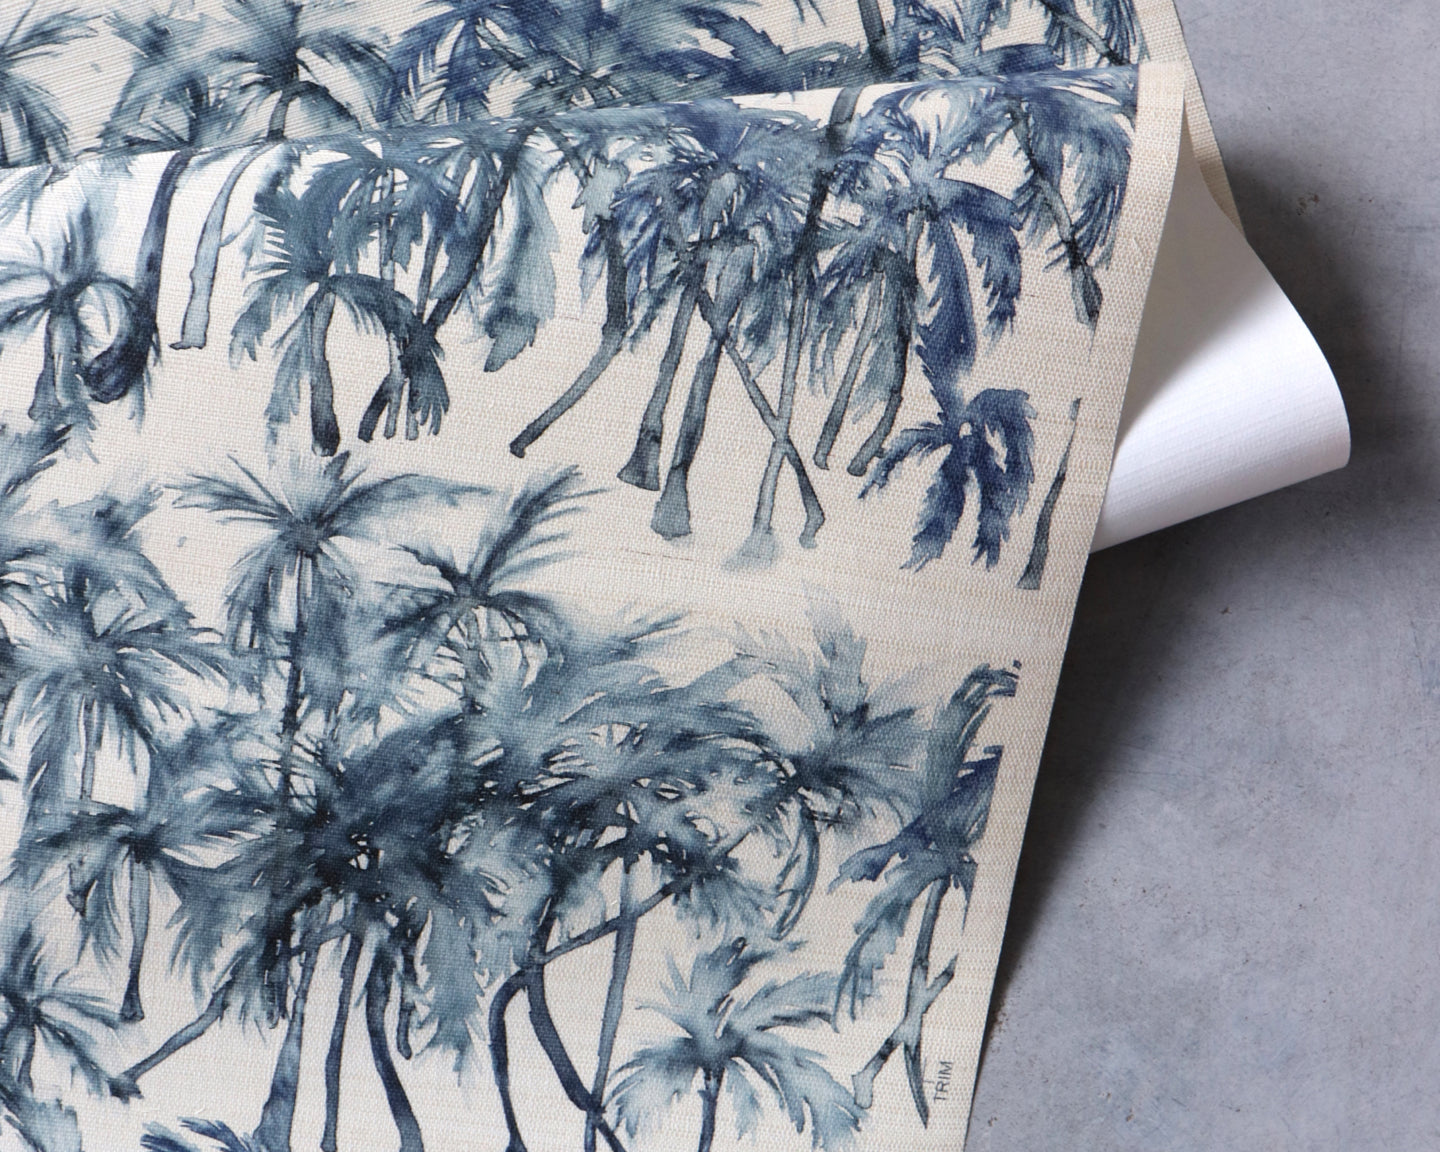 A blue and white paper with palm trees